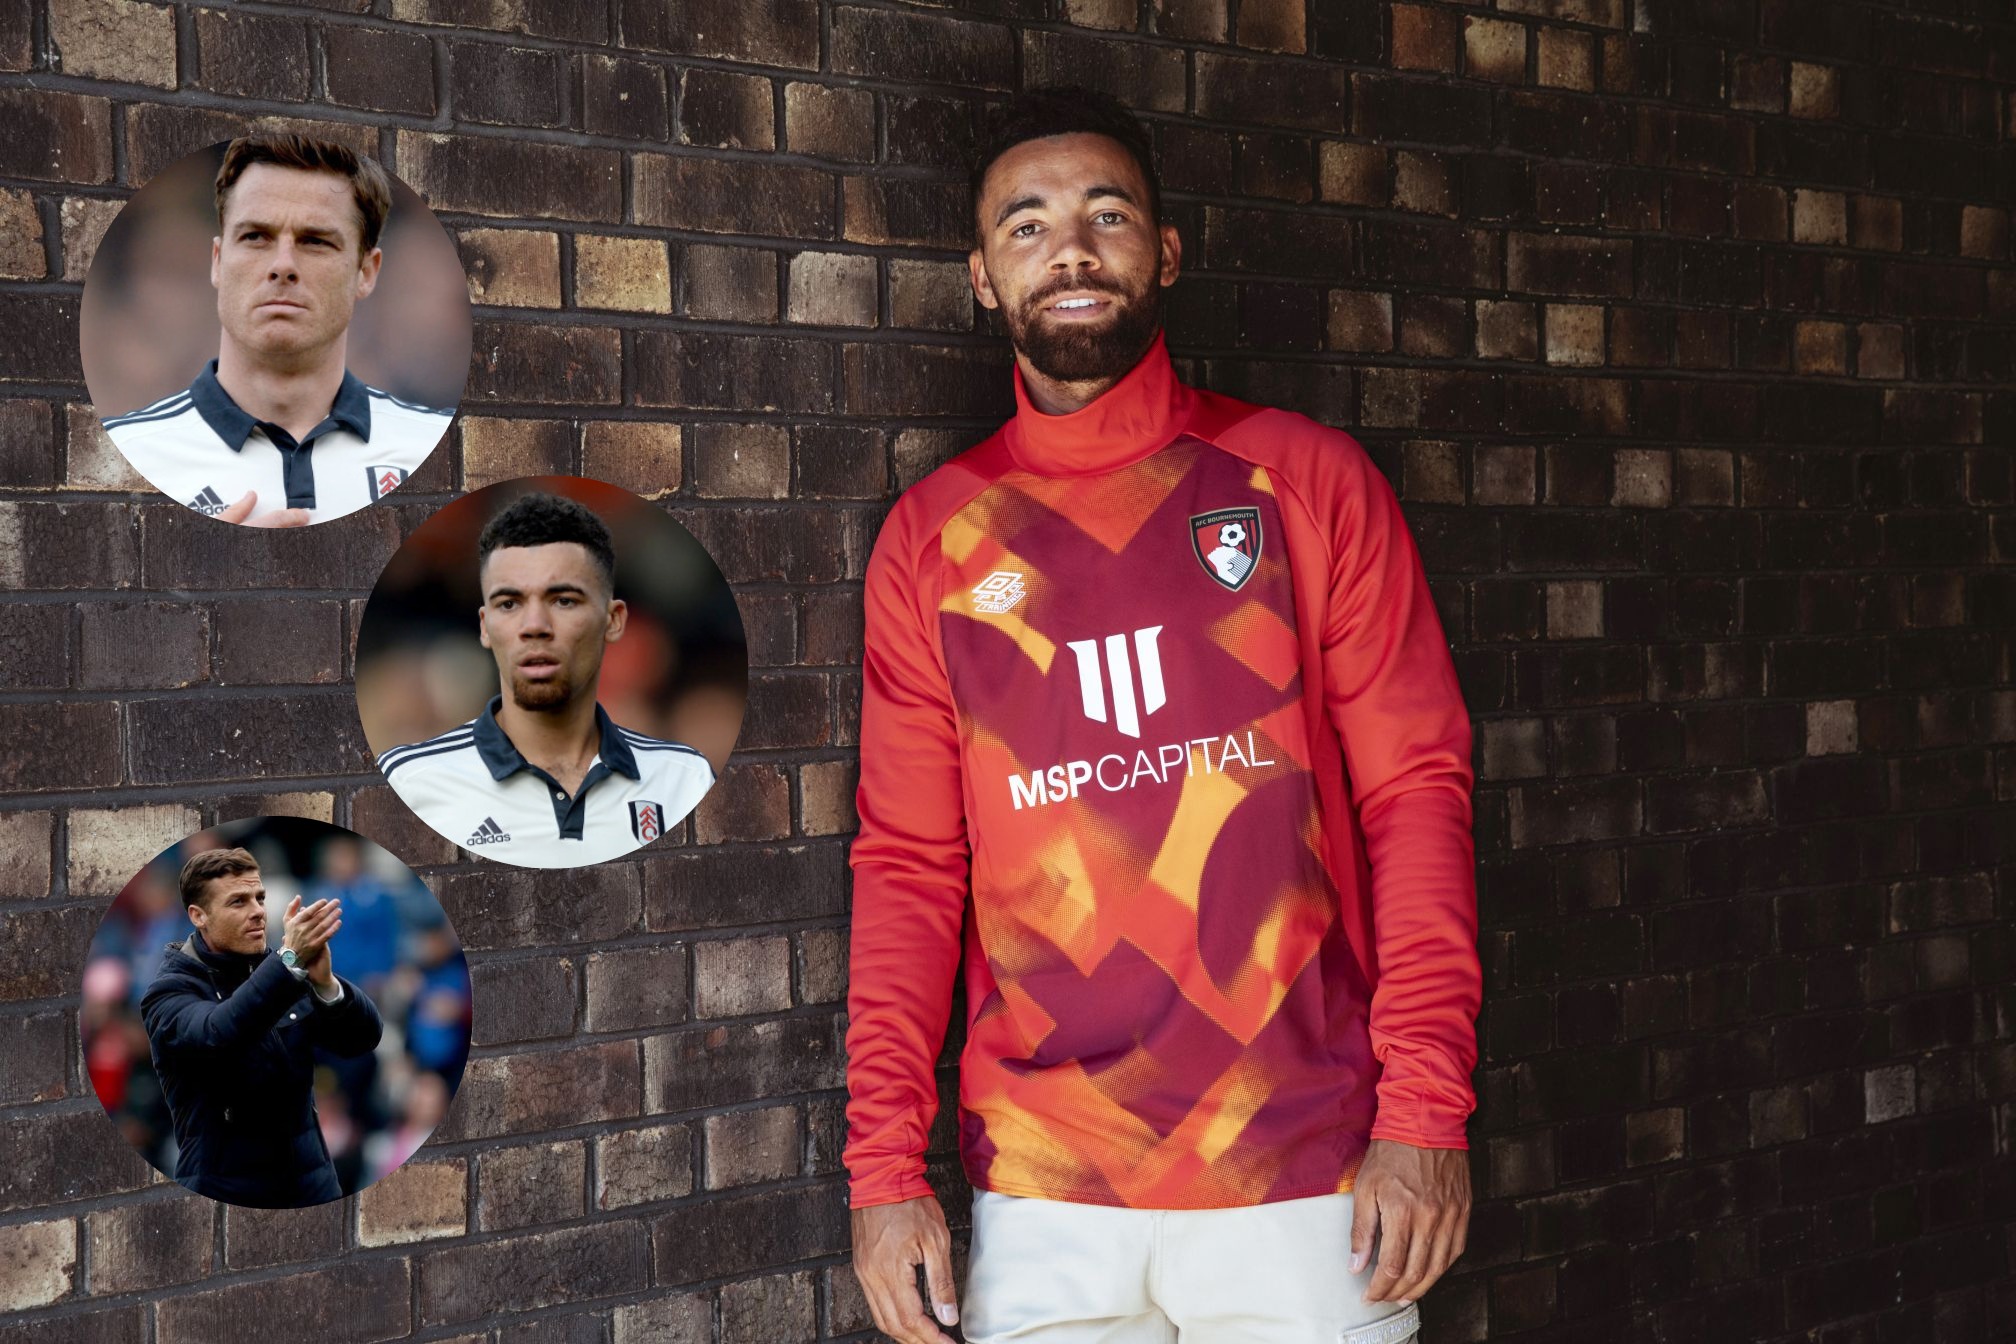 AFC Bournemouth's Ryan Fredericks always believed Scott Parker would go into coaching